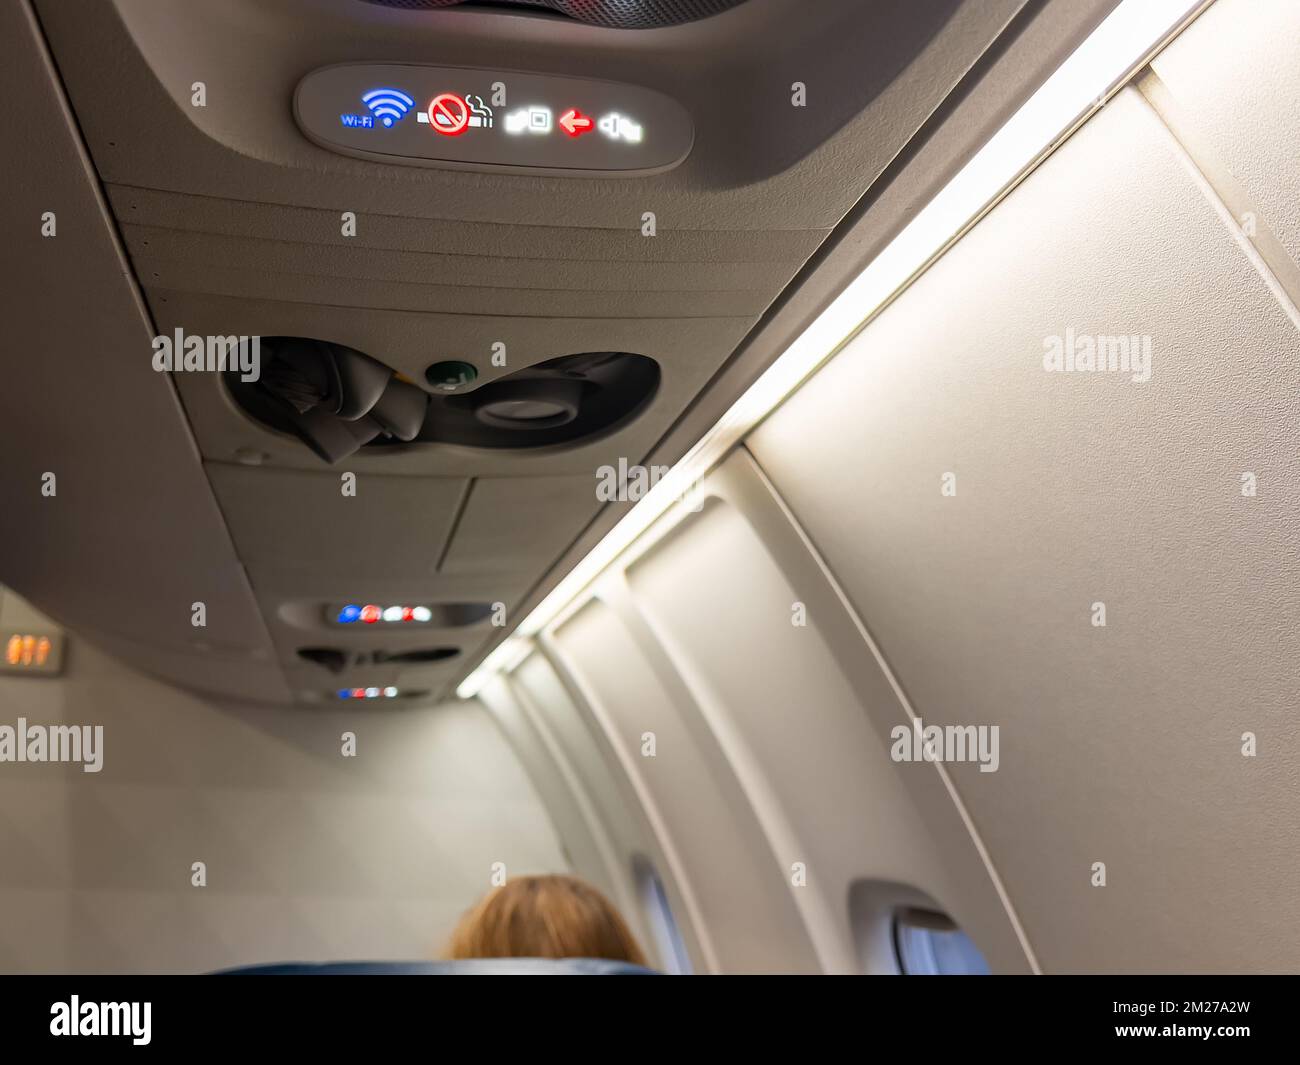 Indicator lights in airplane cabin for wi-fi, no smoking and seat belts. Stock Photo